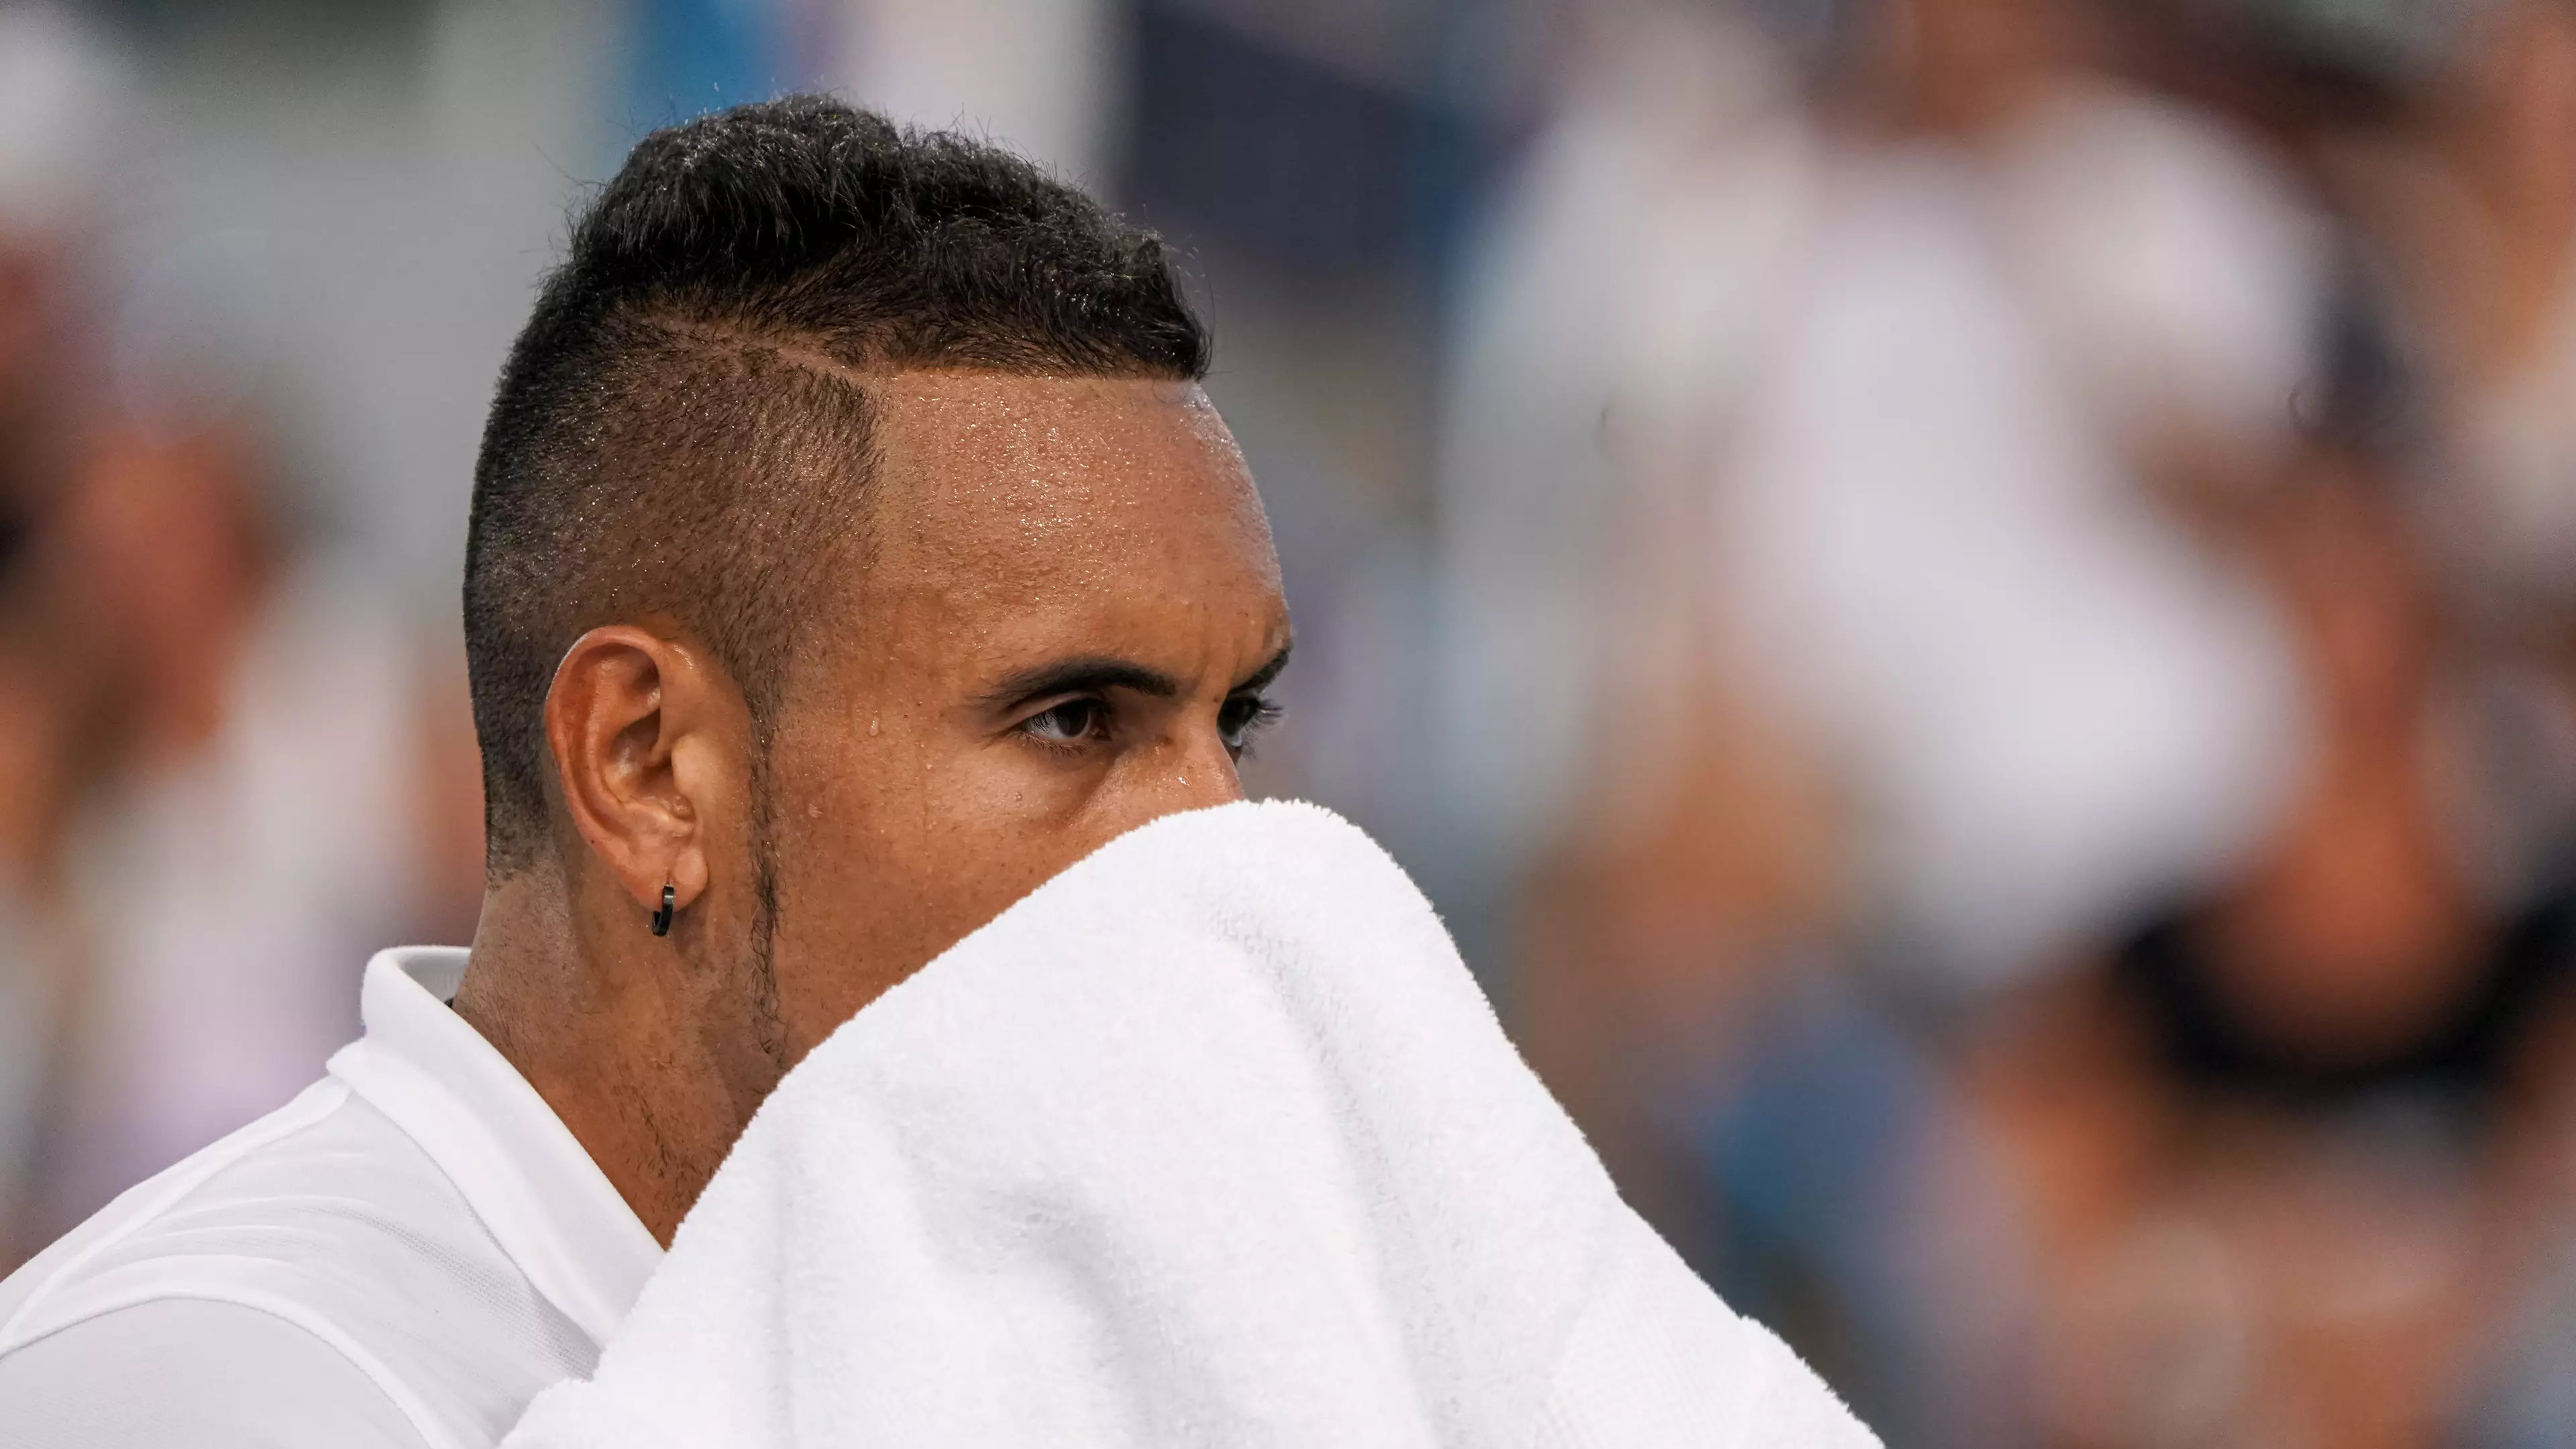 Nick Kyrgios Slapped With Loads Of Fines After Calling The Umpire A 'F**king Tool Bro'